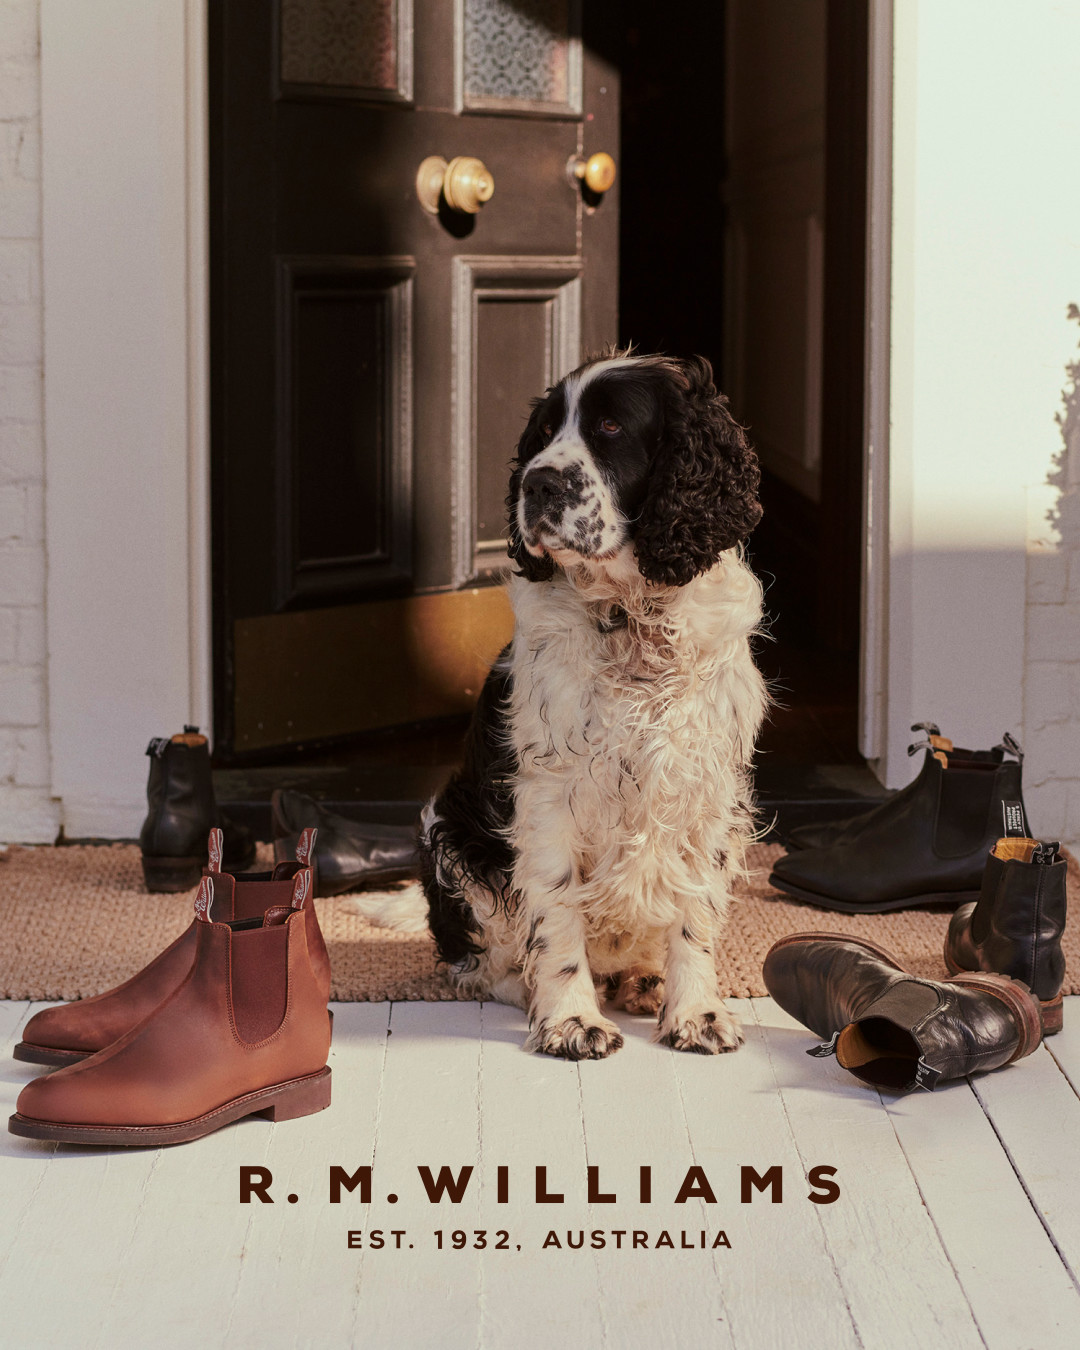 HOME OF THE HOLIDAYS - RM WILLIAMS